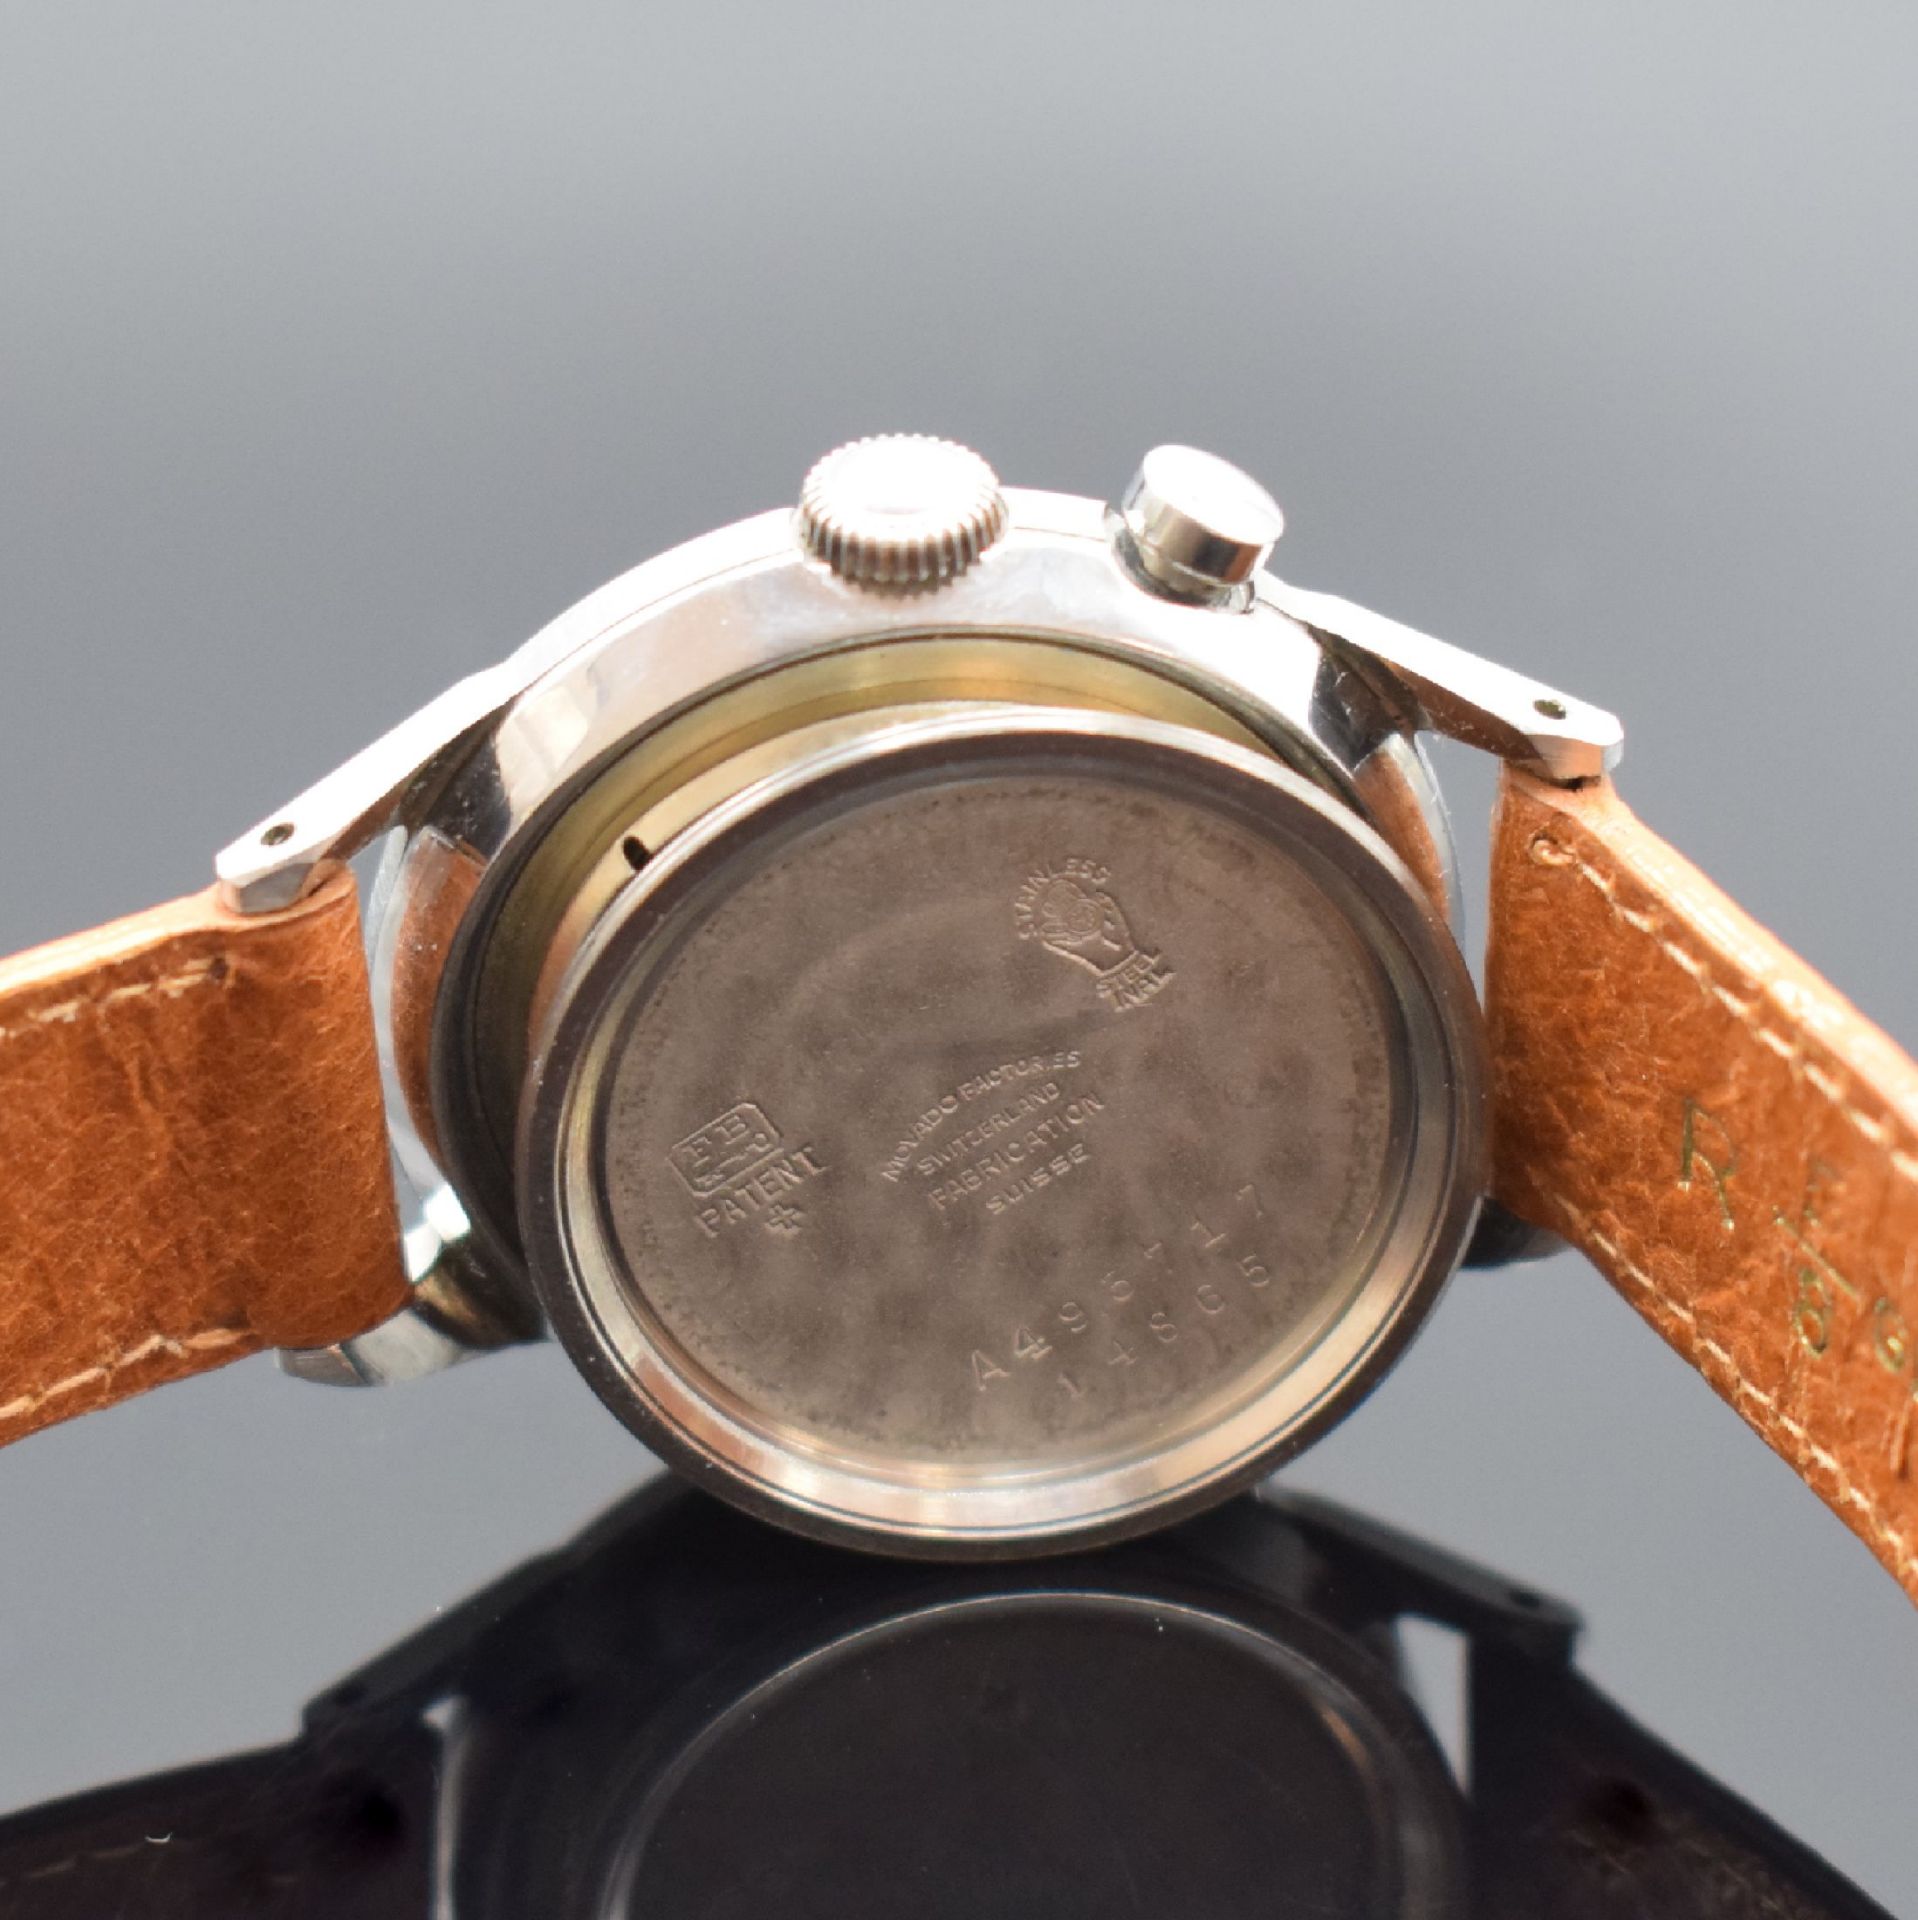 MOVADO Chronostop seltener Armbandchronograph in Stahl, - Image 6 of 6